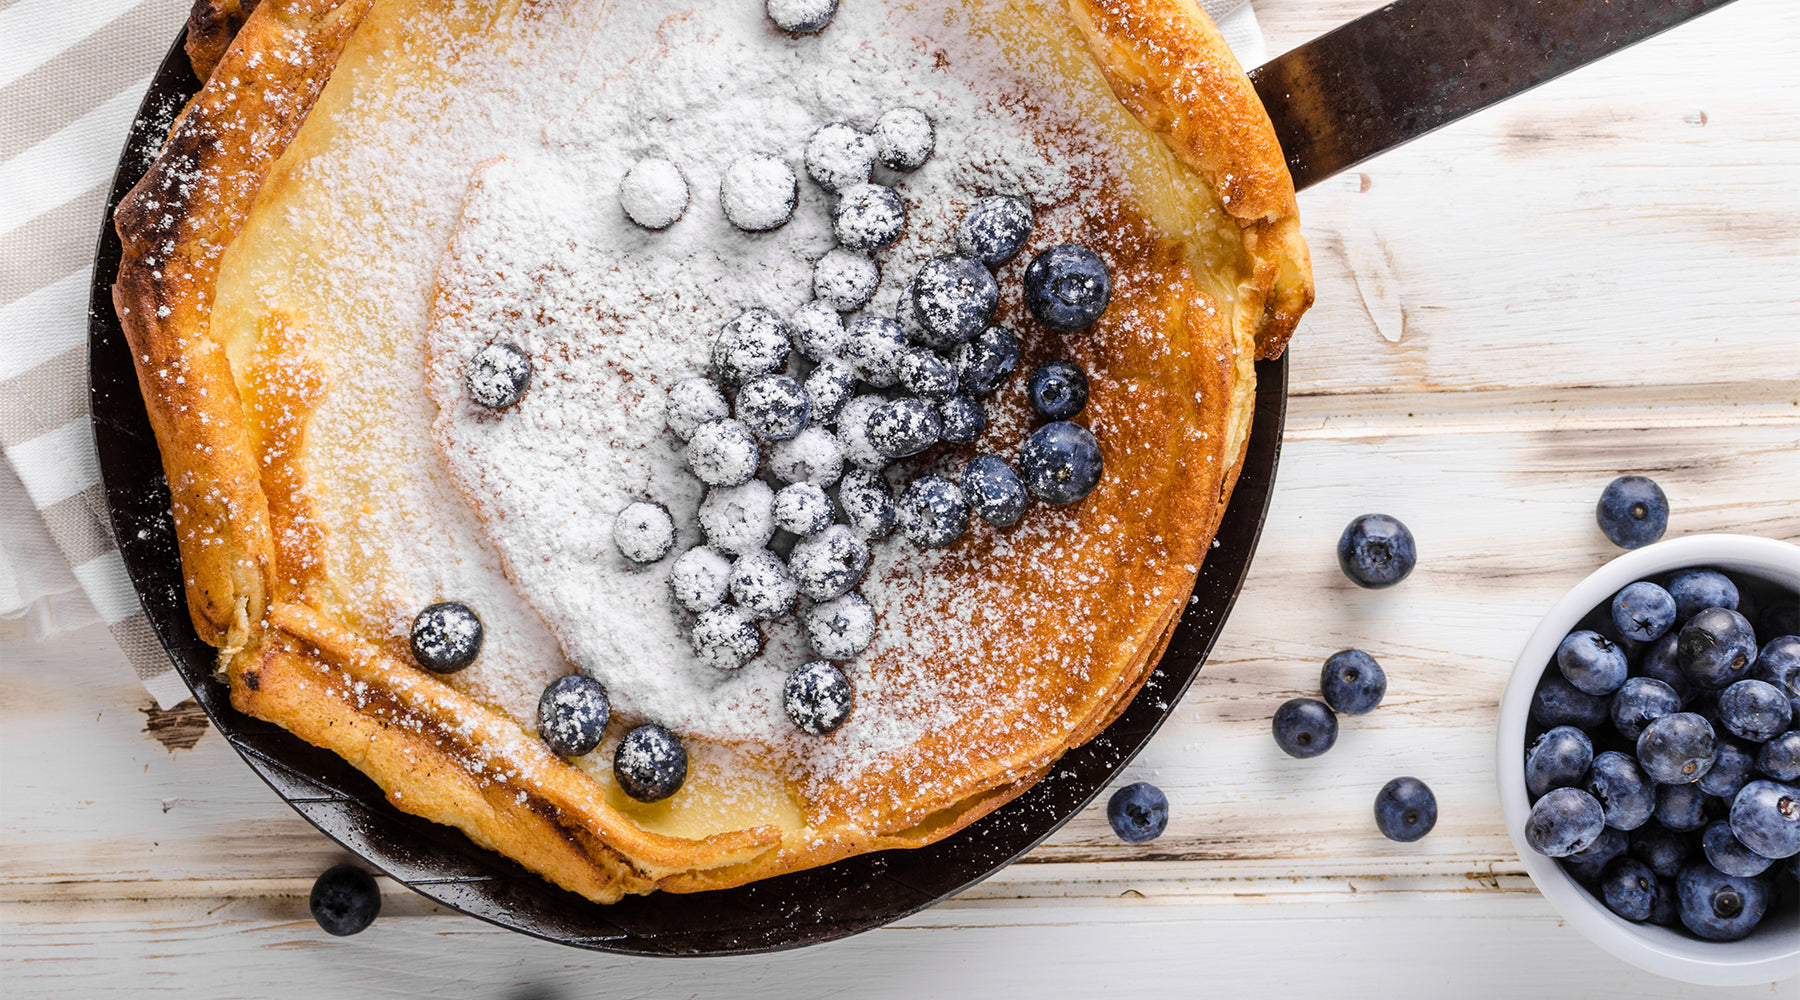 Here's Why You Should Always Have Pancake Mix Handy